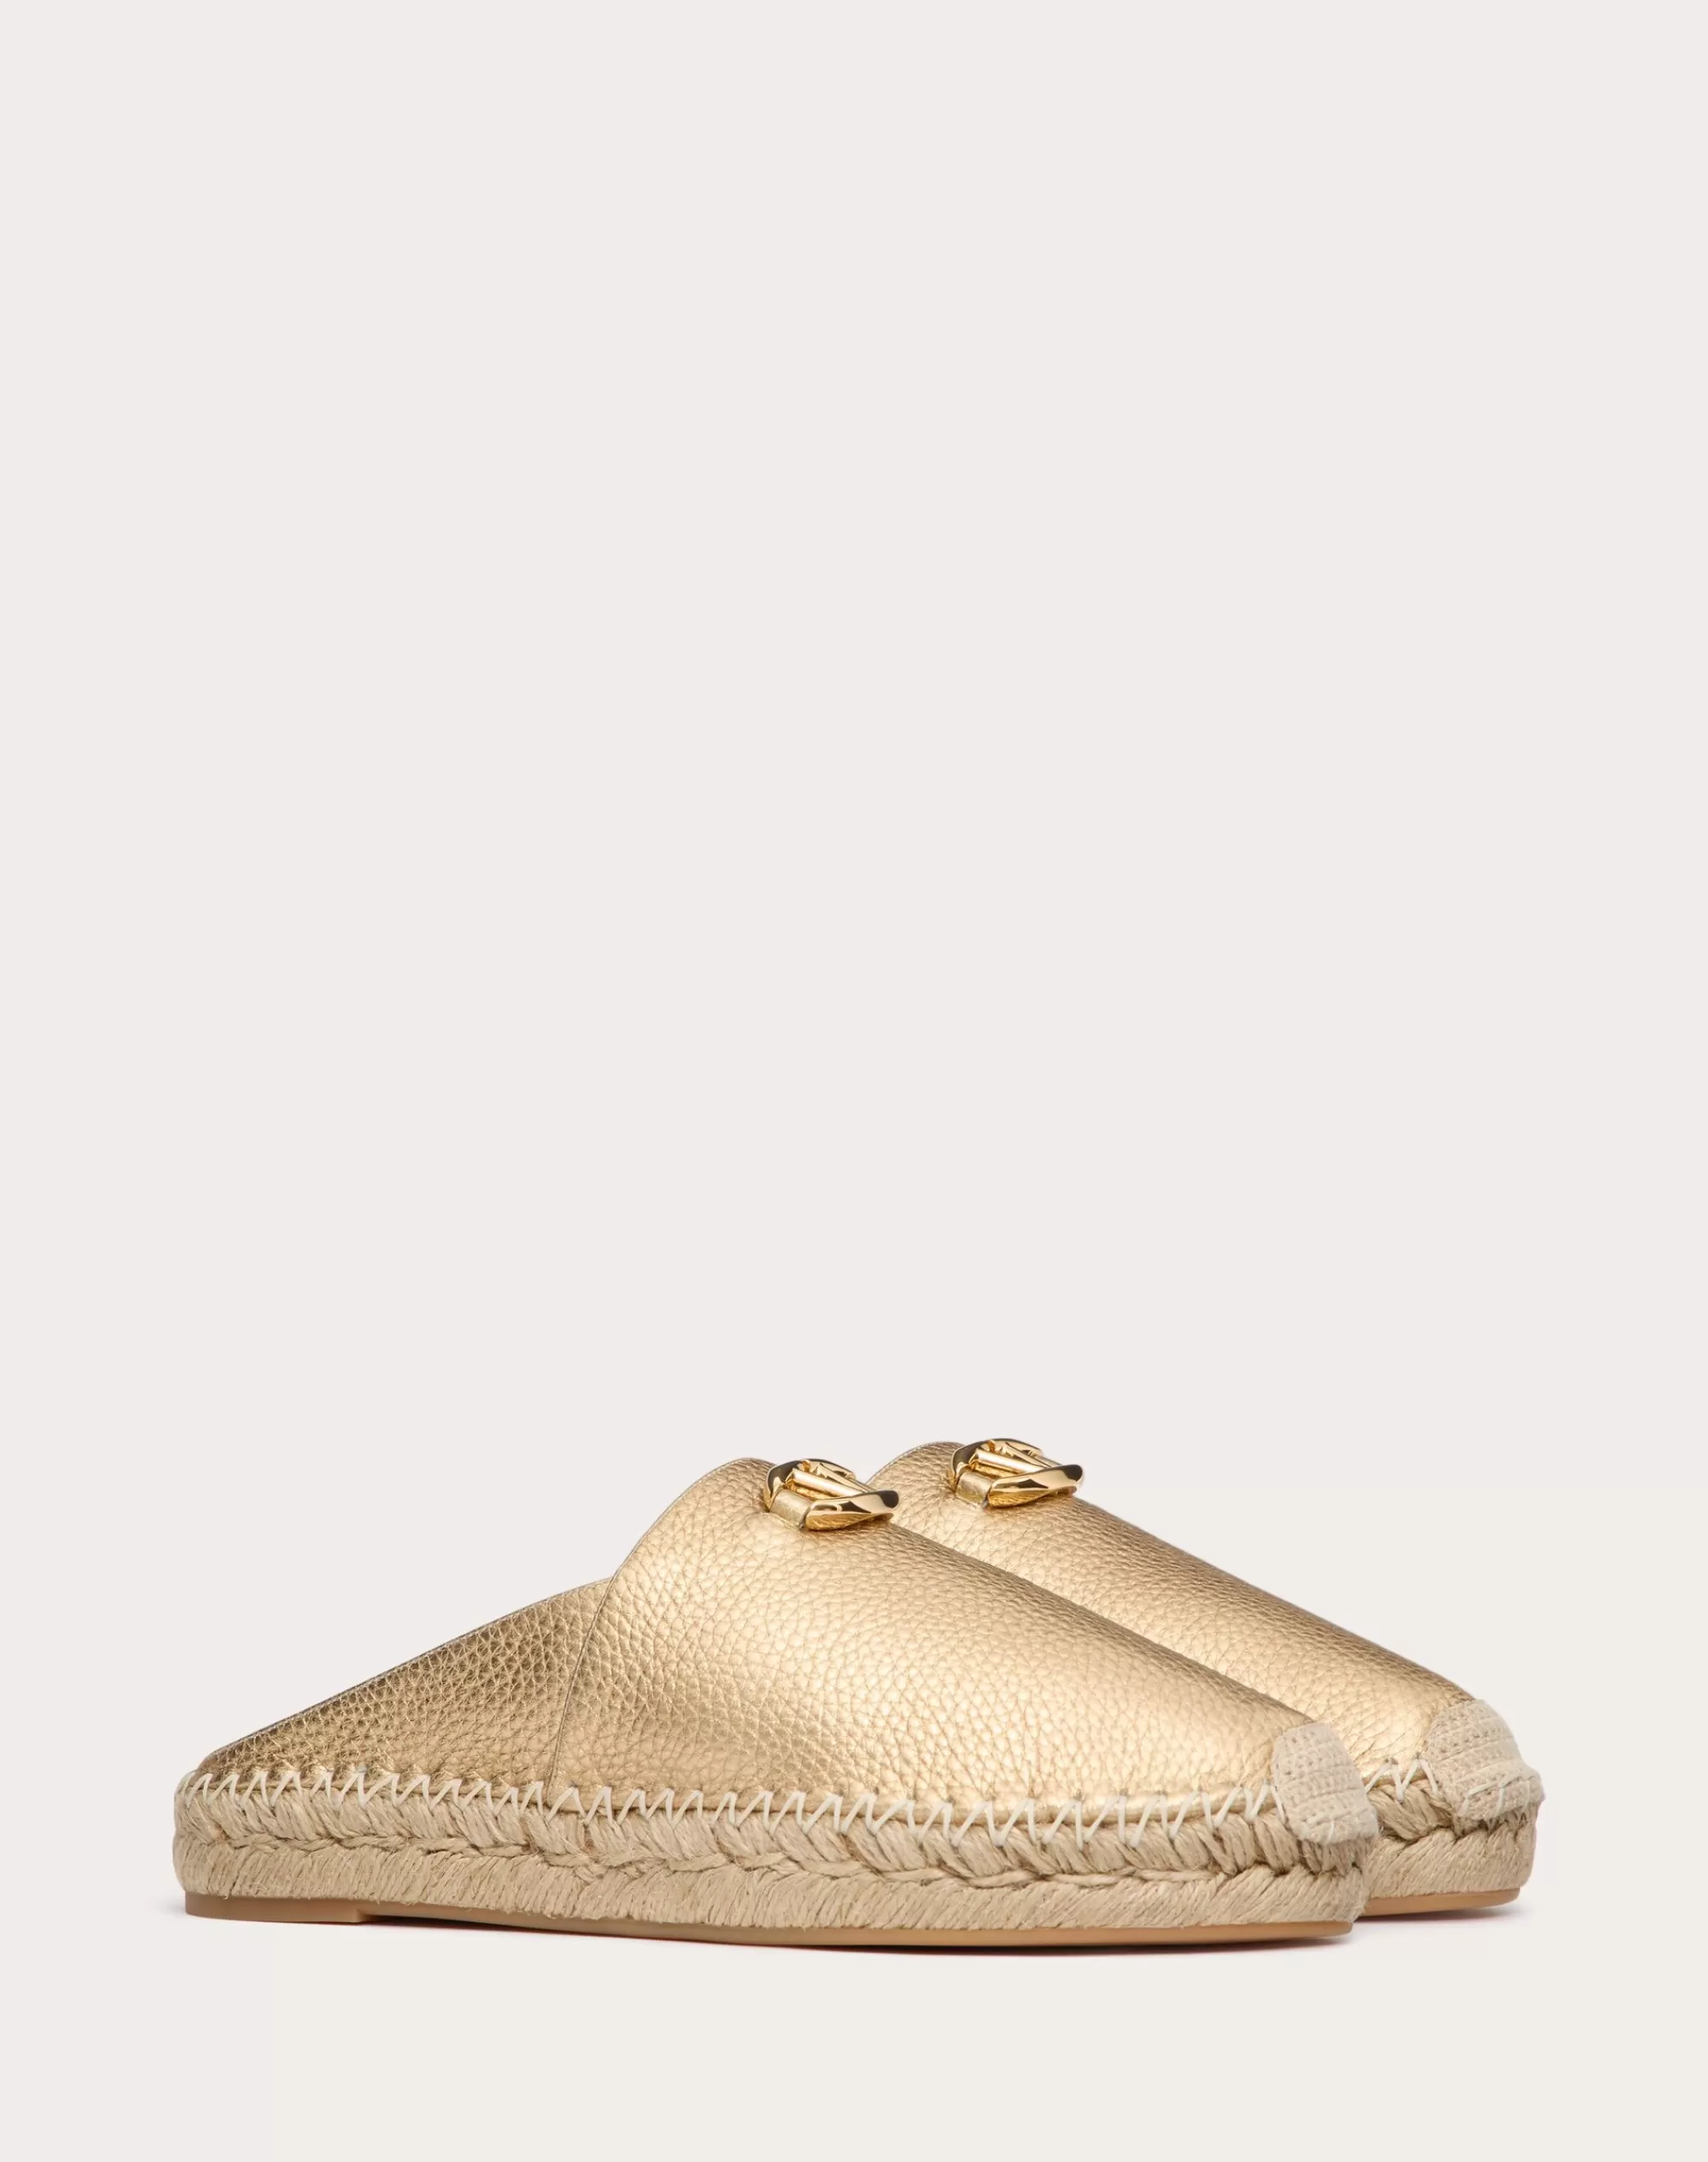 Valentino THE BOLD EDITION VLOGO MULE IN METALLIC GRAINY CALFSKIN 25MM Gold Outlet